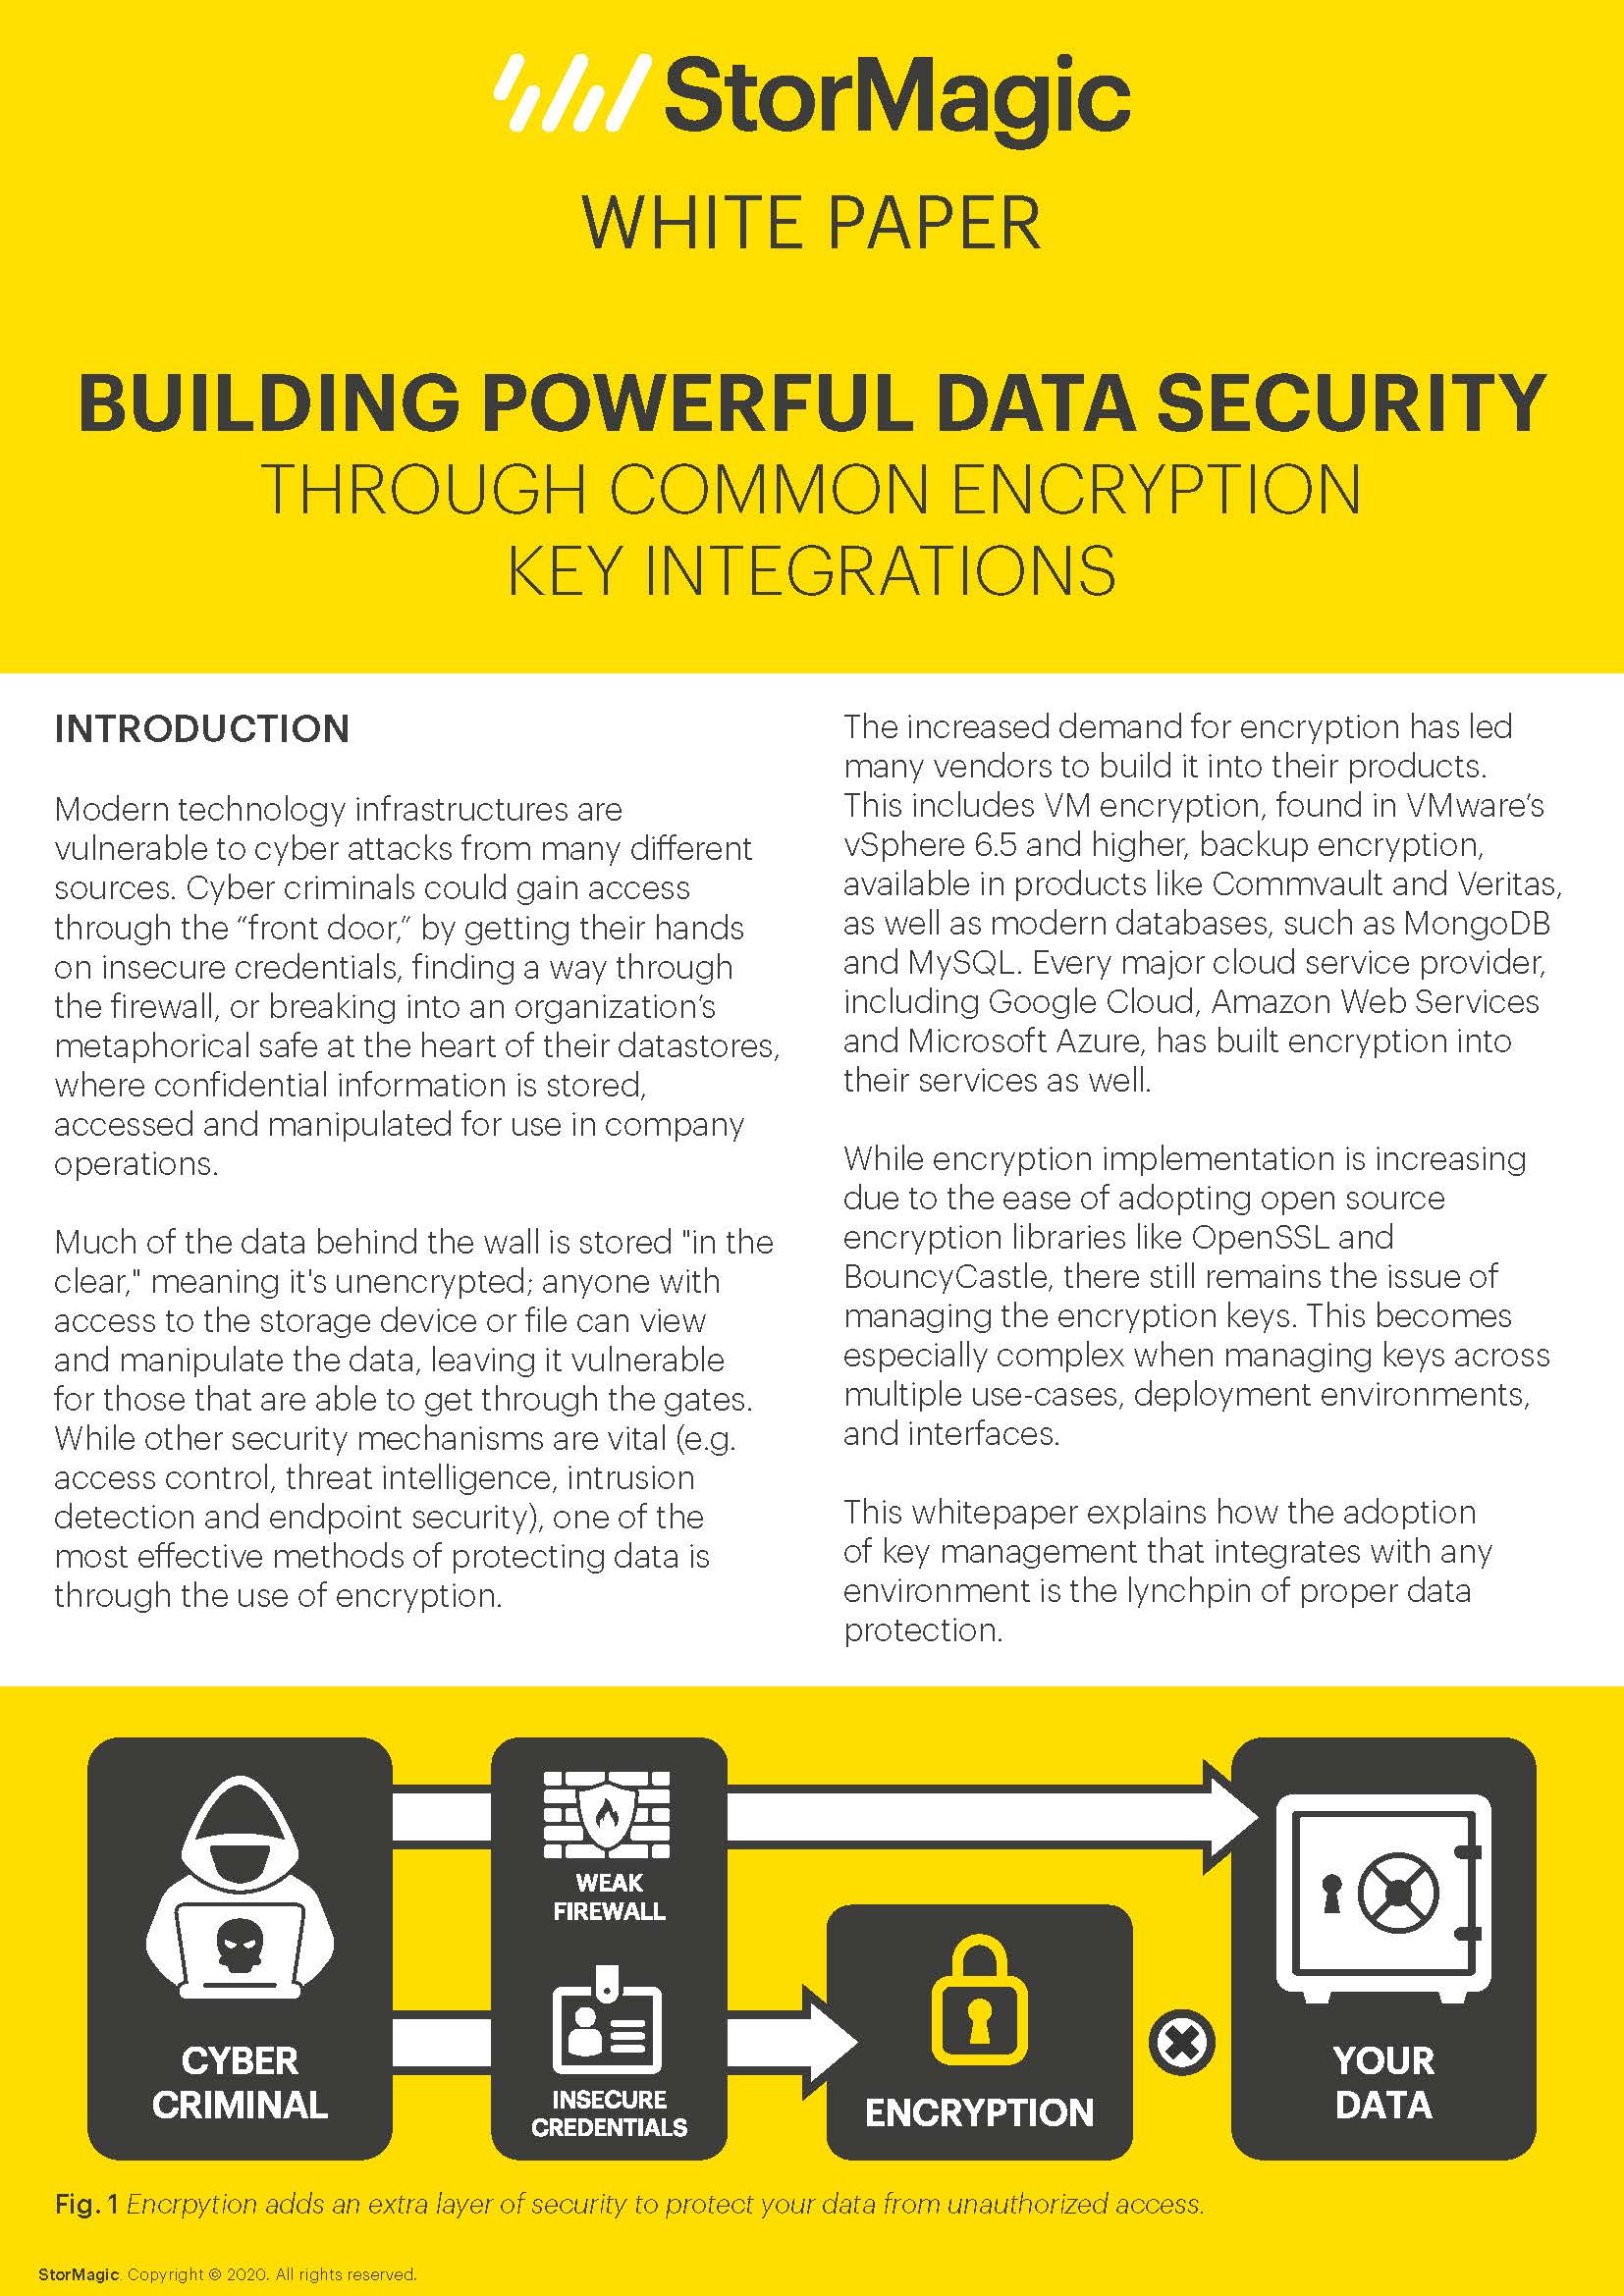 Building powerful data security through common encryption key integrations